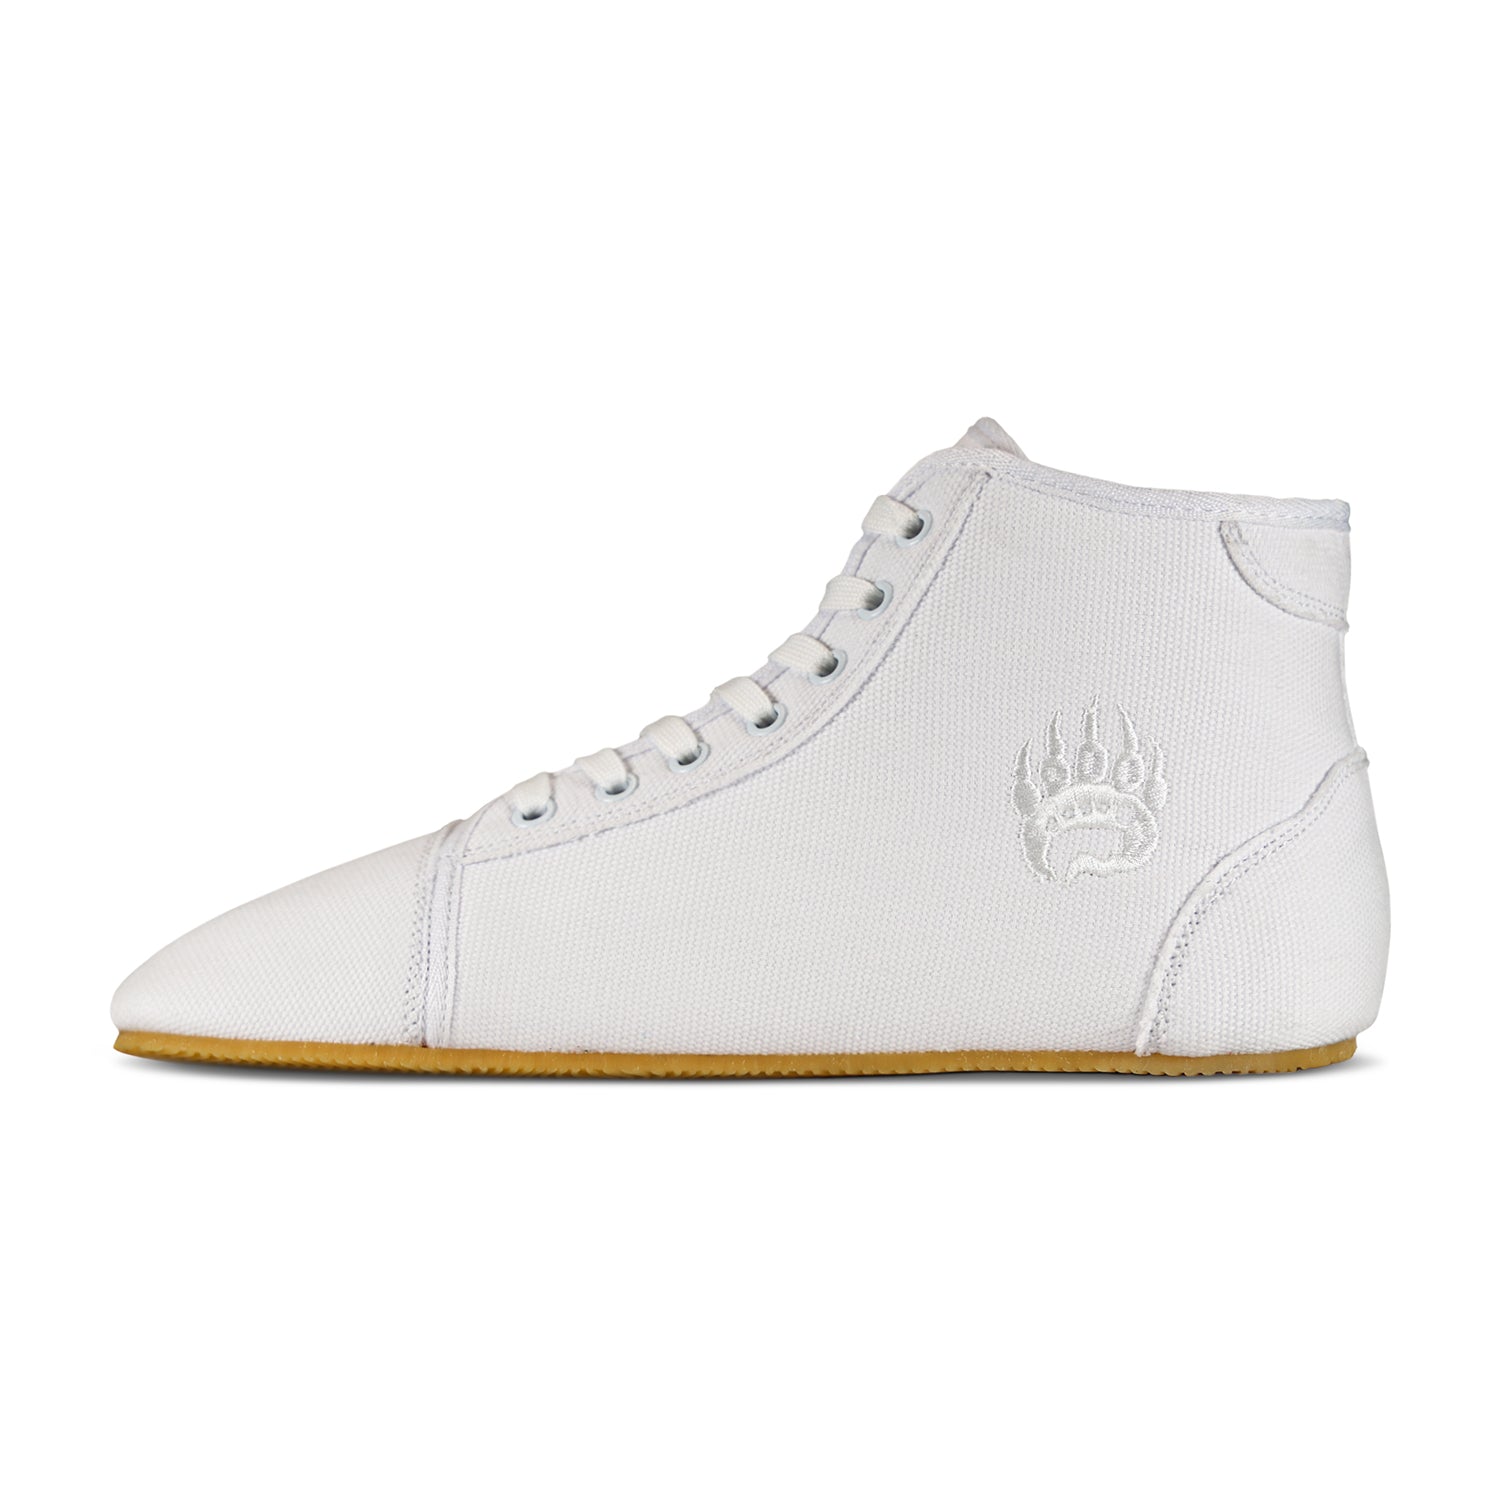 White Ursus Canvas high-top training sneaker with laces and a minimalist design logo on the side, ideal for strength athletes by Bearfoot.